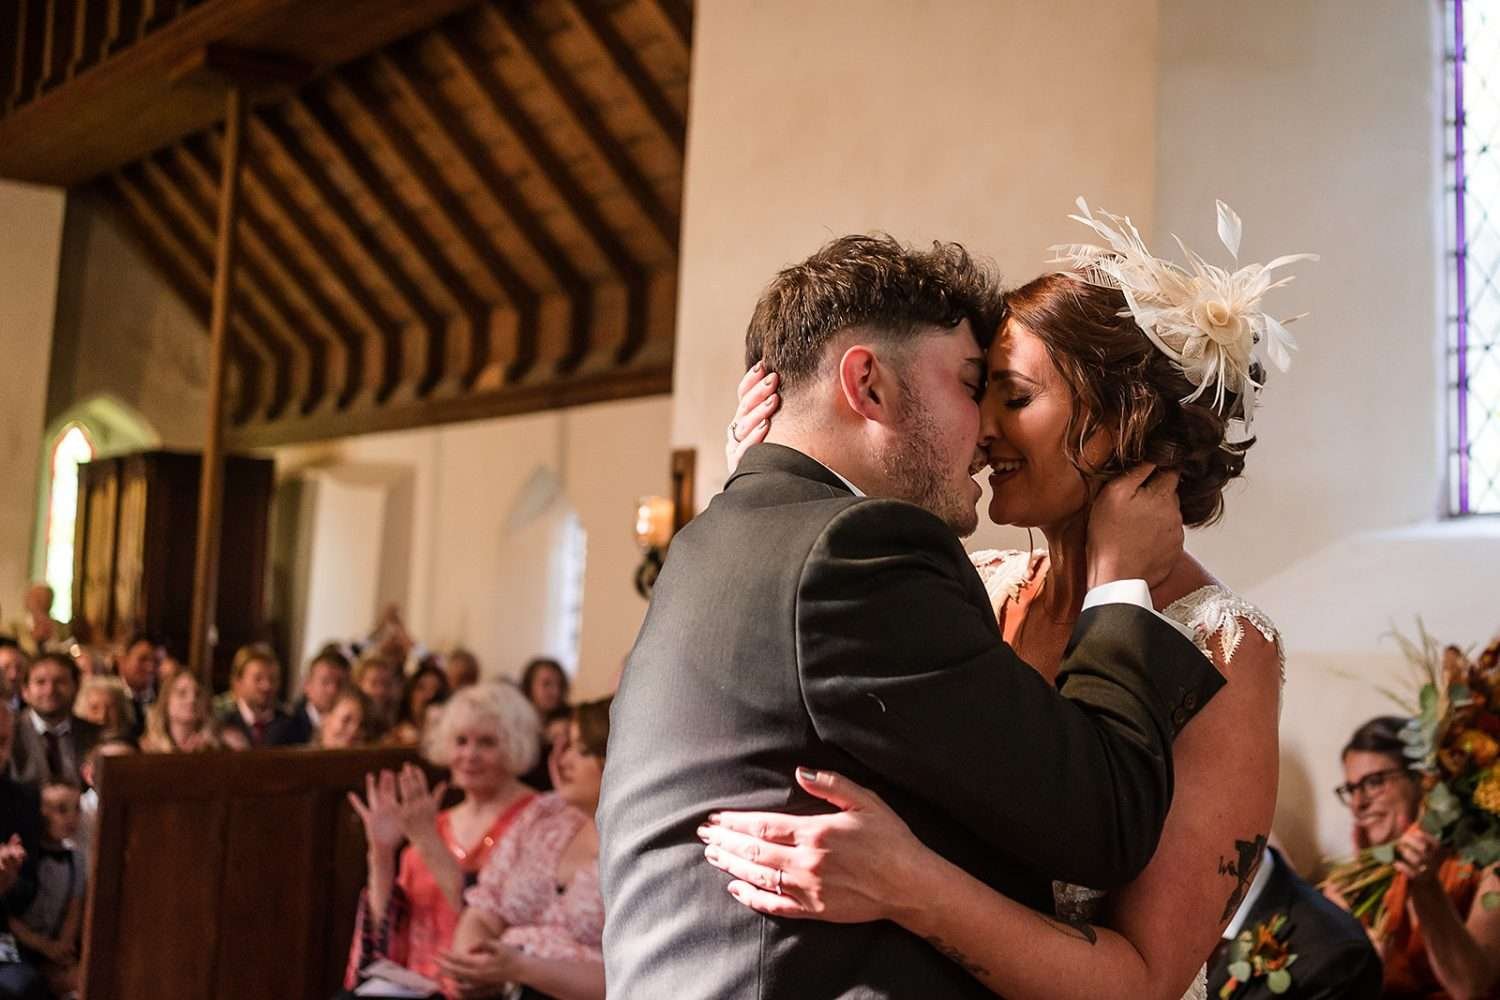 A bride and groom have their first kiss at the end of their wedding ceremony at the church at fishley hall in the norfolk broads. Their family watch on and applaud. 